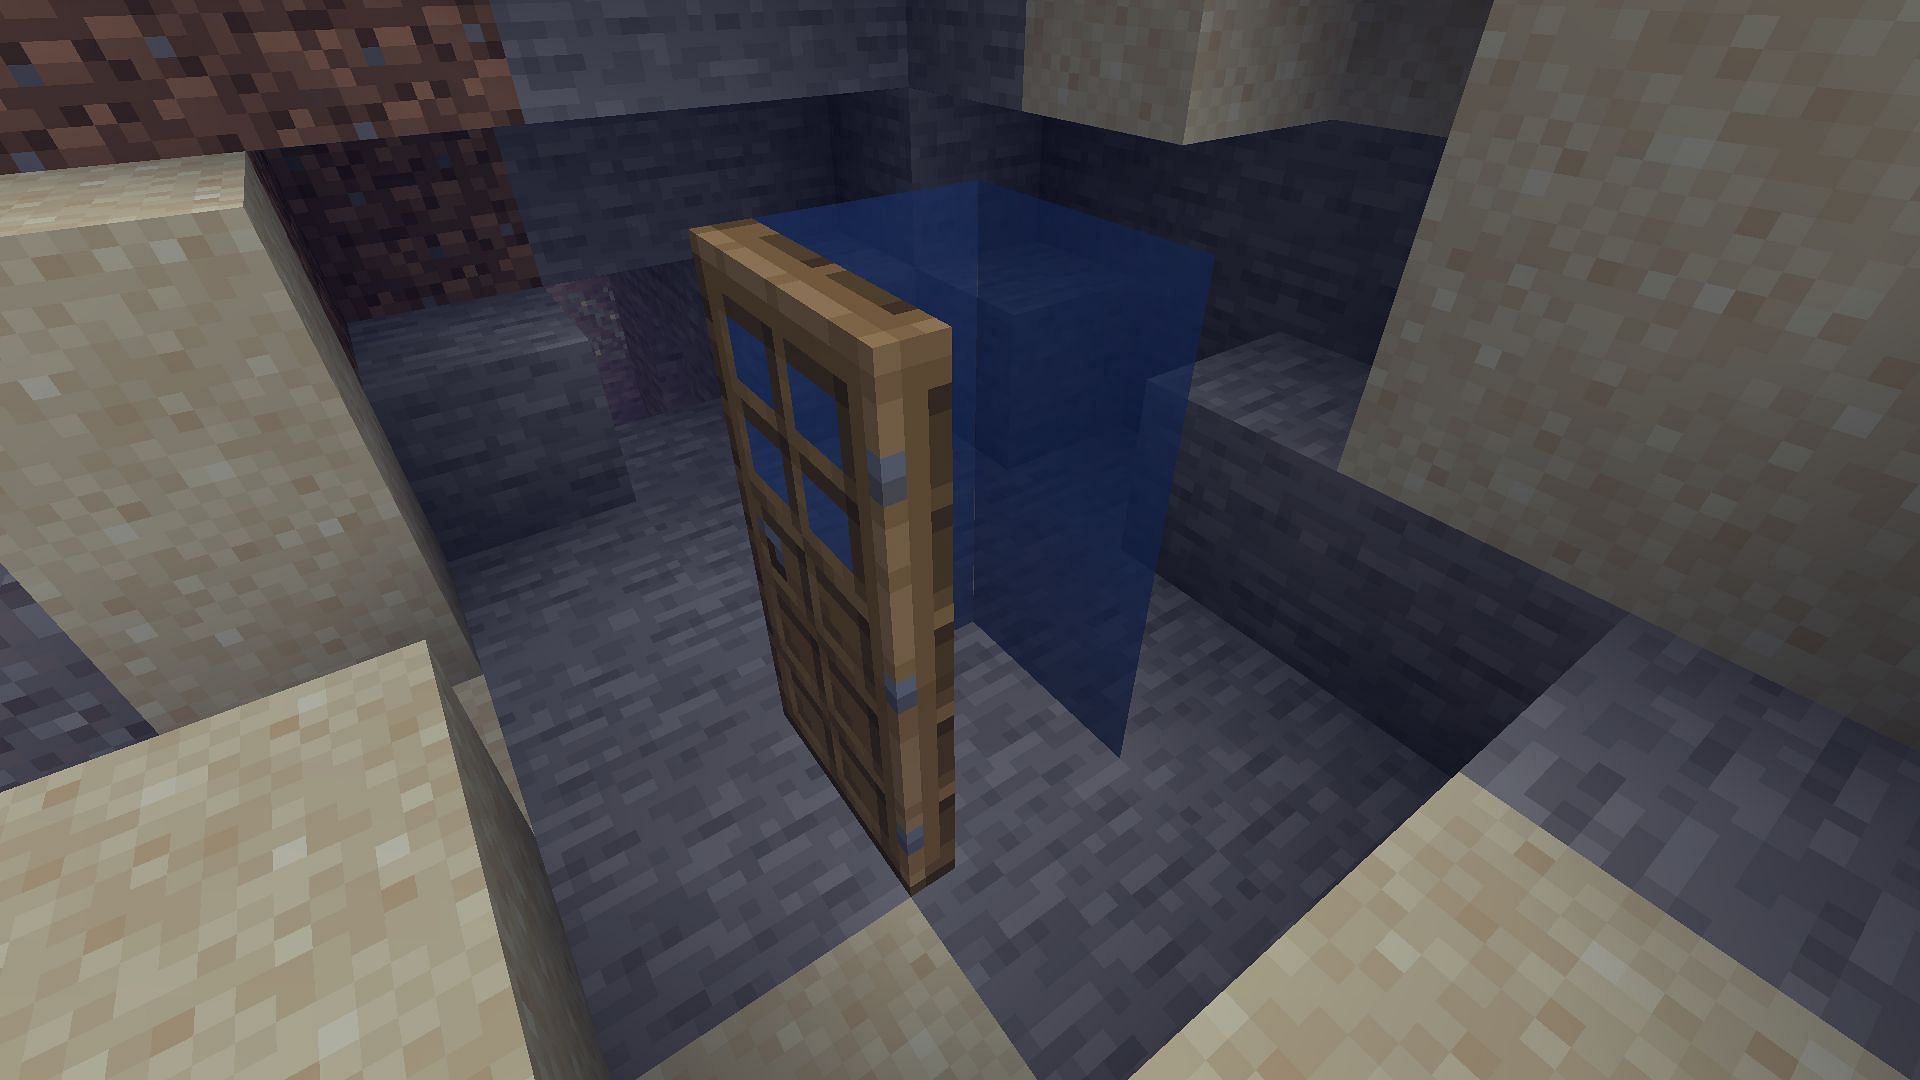 Air pocket made by a door where players can breathe in Minecraft (Image via Mojang)